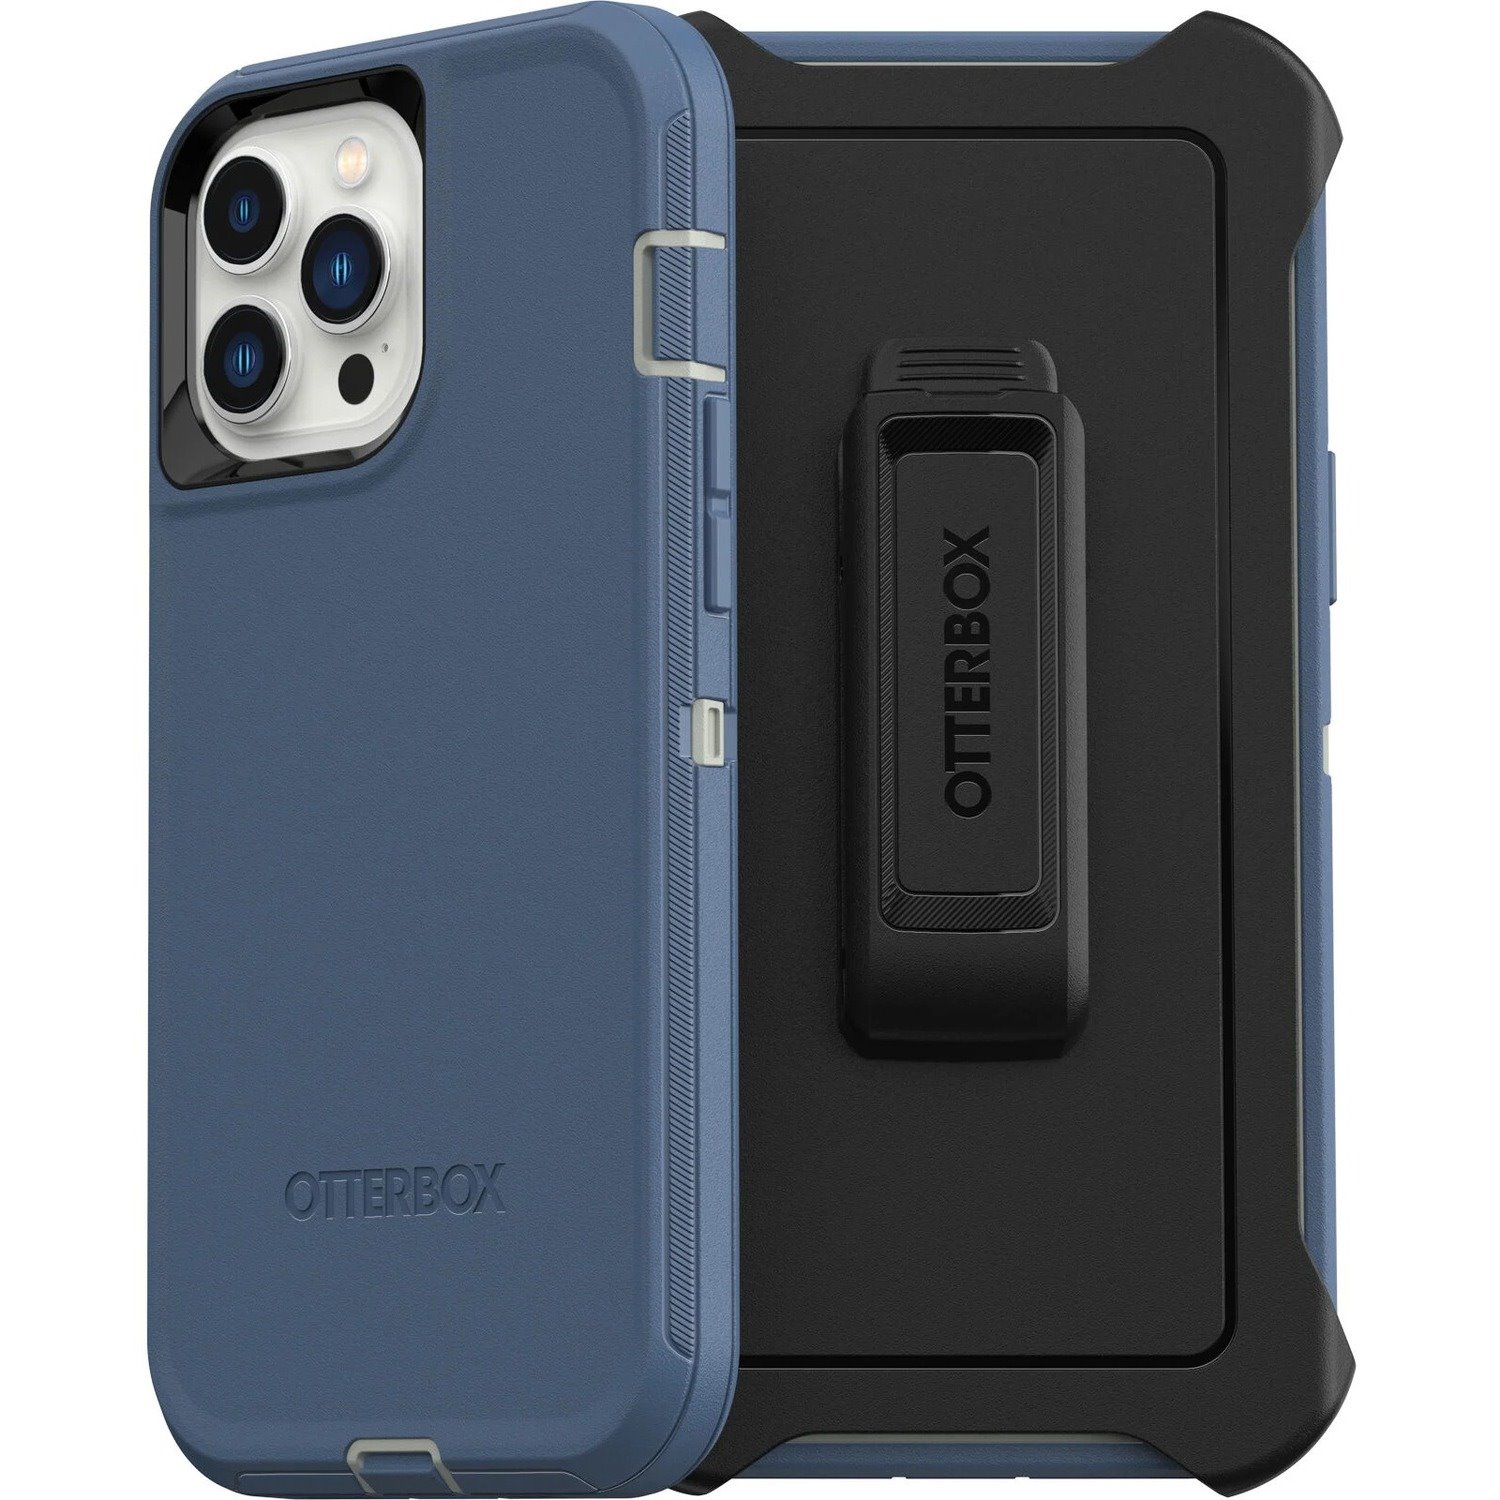 OtterBox Defender Rugged Carrying Case (Holster) Apple iPhone 13 Pro Max, iPhone 12 Pro Max Smartphone - Fort Blue